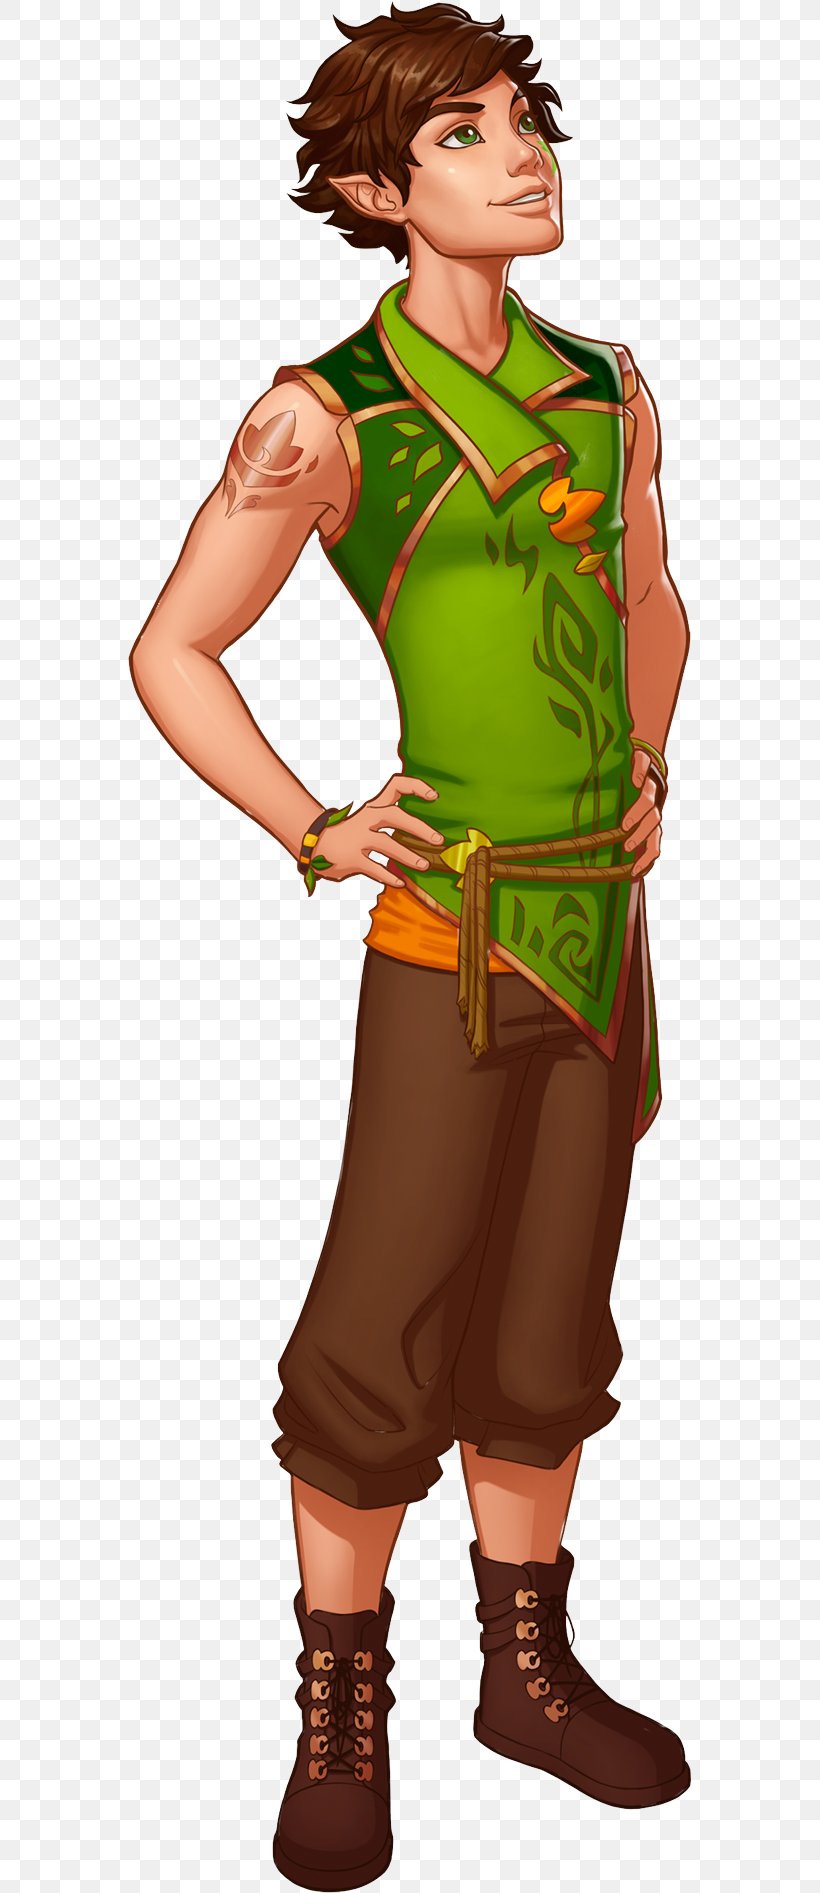 Lego Elves Sira Copperbranch Ragana Shadowflame Farran Leafshade, PNG, 564x1893px, Lego Elves, Arm, Brown Hair, Costume, Costume Design Download Free